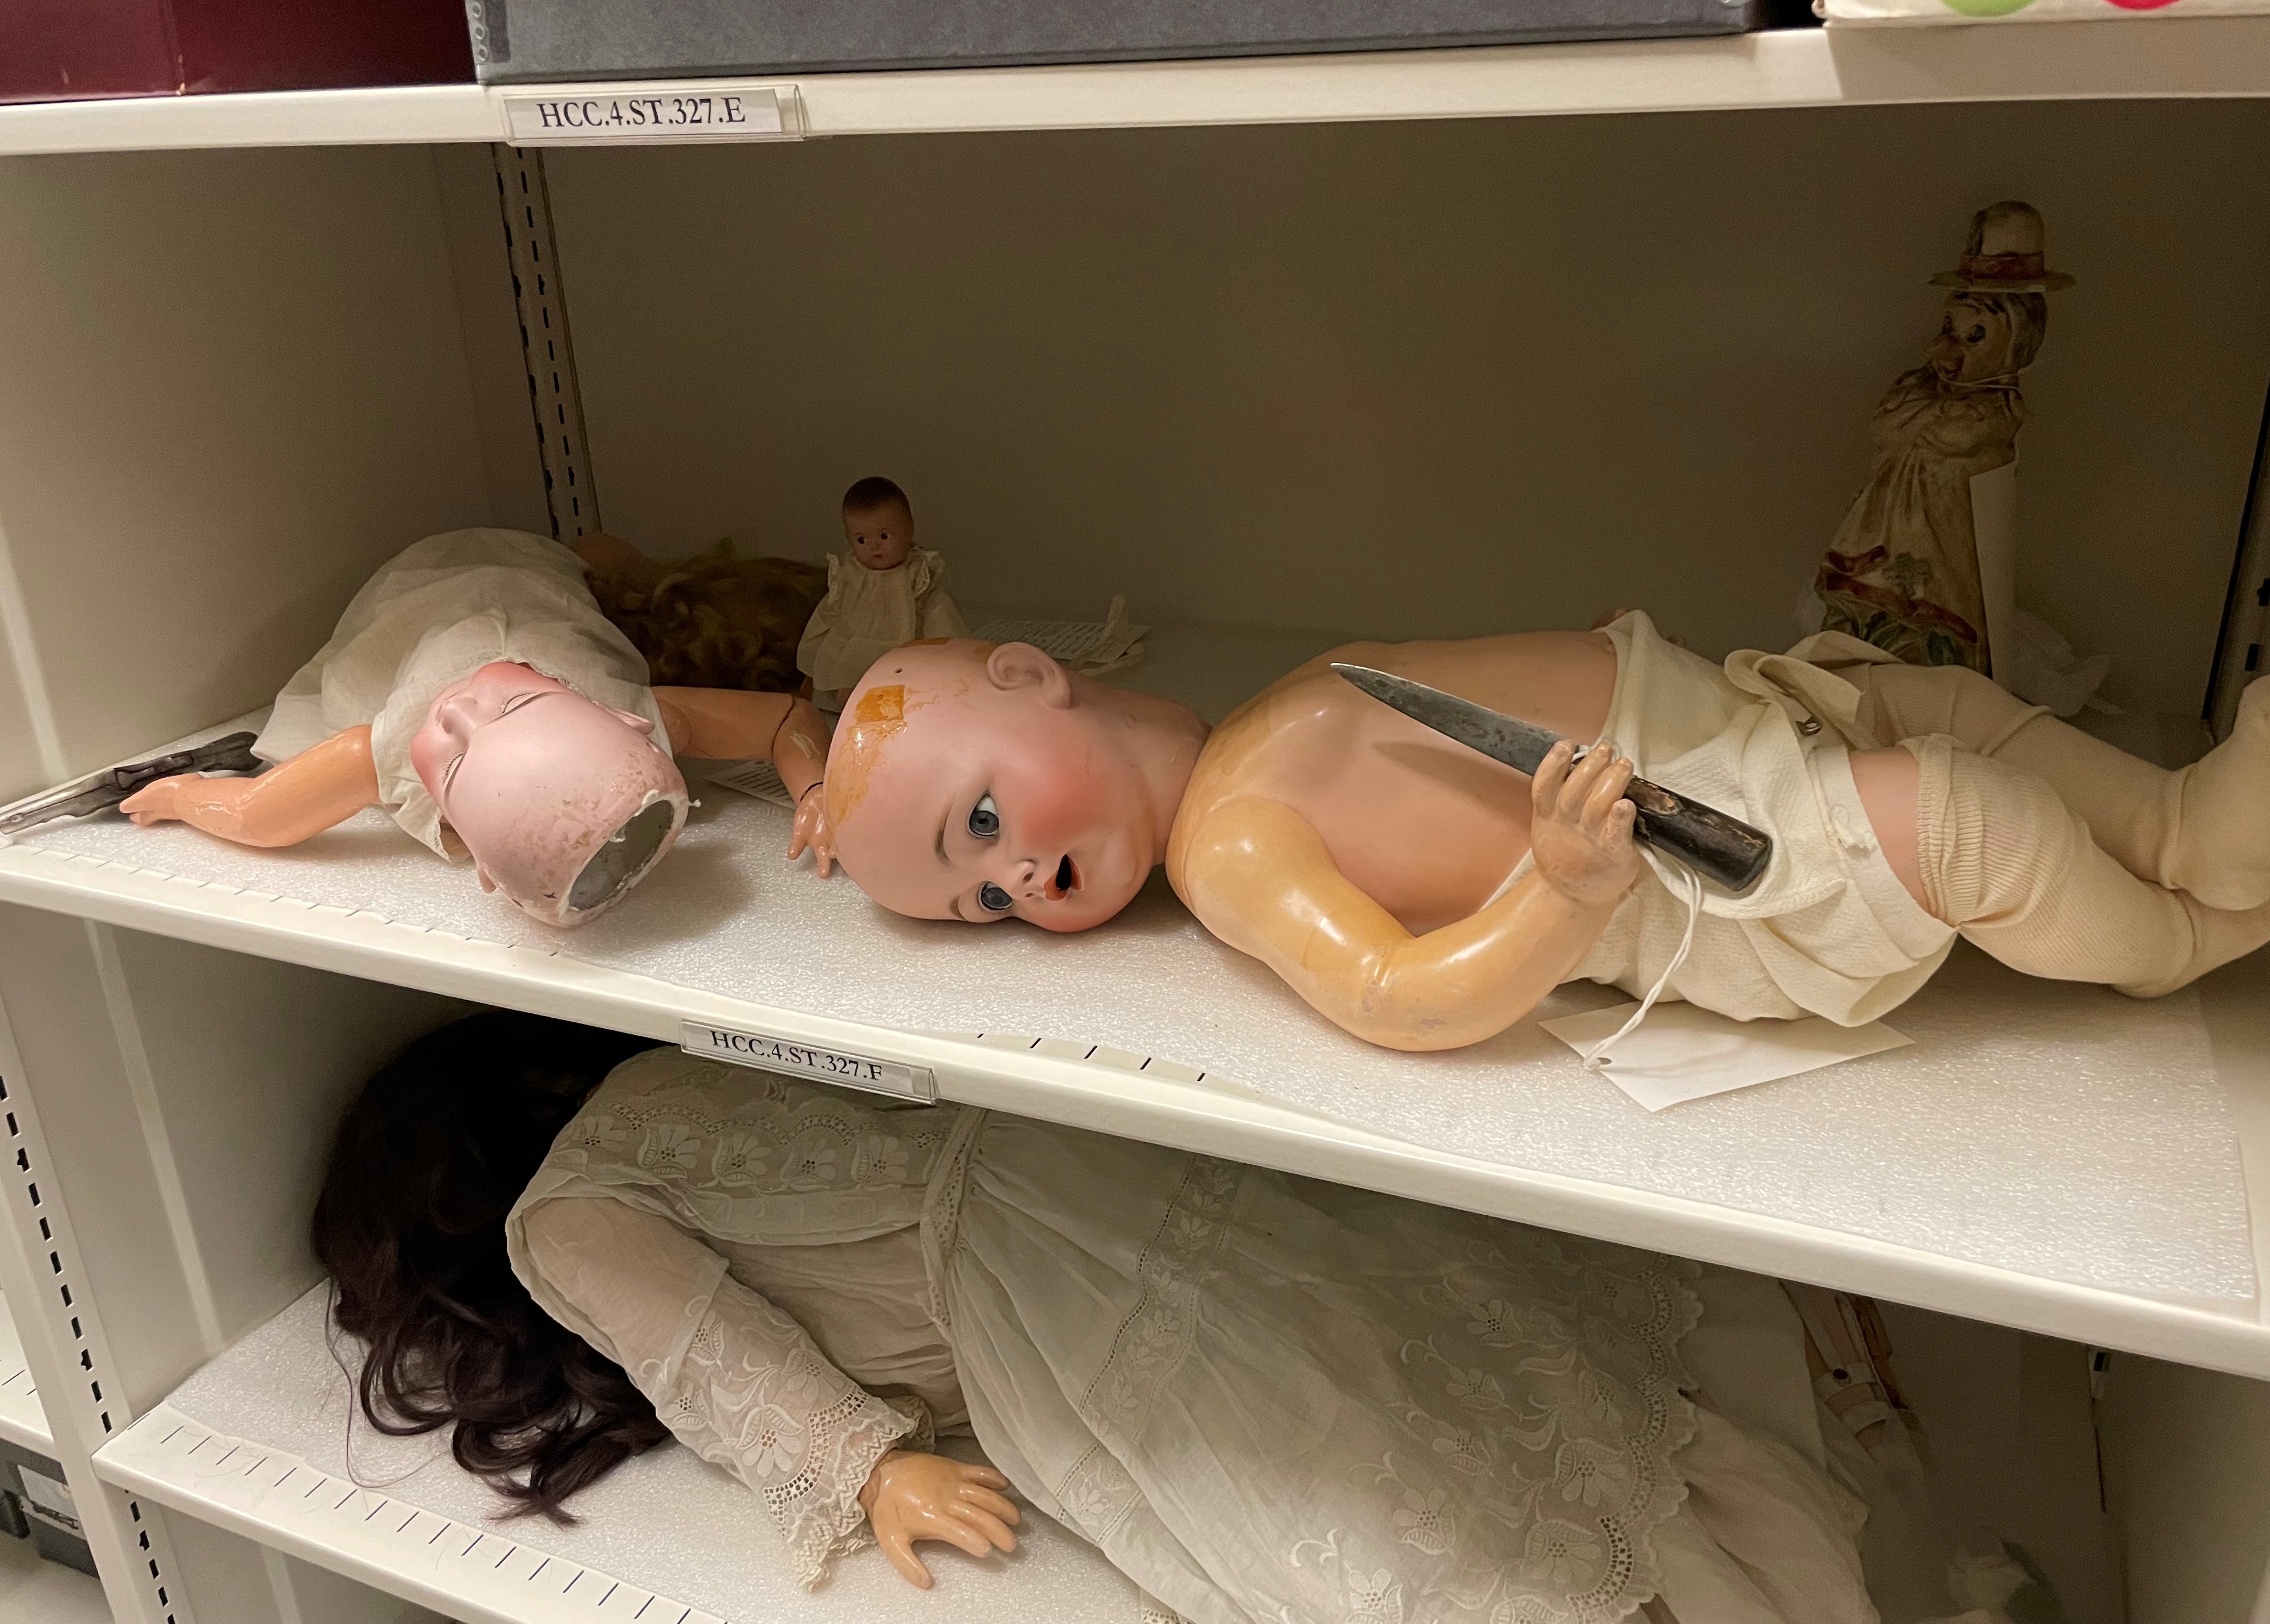 Photo of white metal storage shelves, upon which several dolls are laying either on their backs or facedown. On the higher shelf are two larger dolls that are missing the tops of their porcelain heads and have no hair. The doll on the right, wearing stockings and a cloth diaper, is holding a short knife in its right hand. The knife was staged there as a joke by one of the History Colorado staff members.